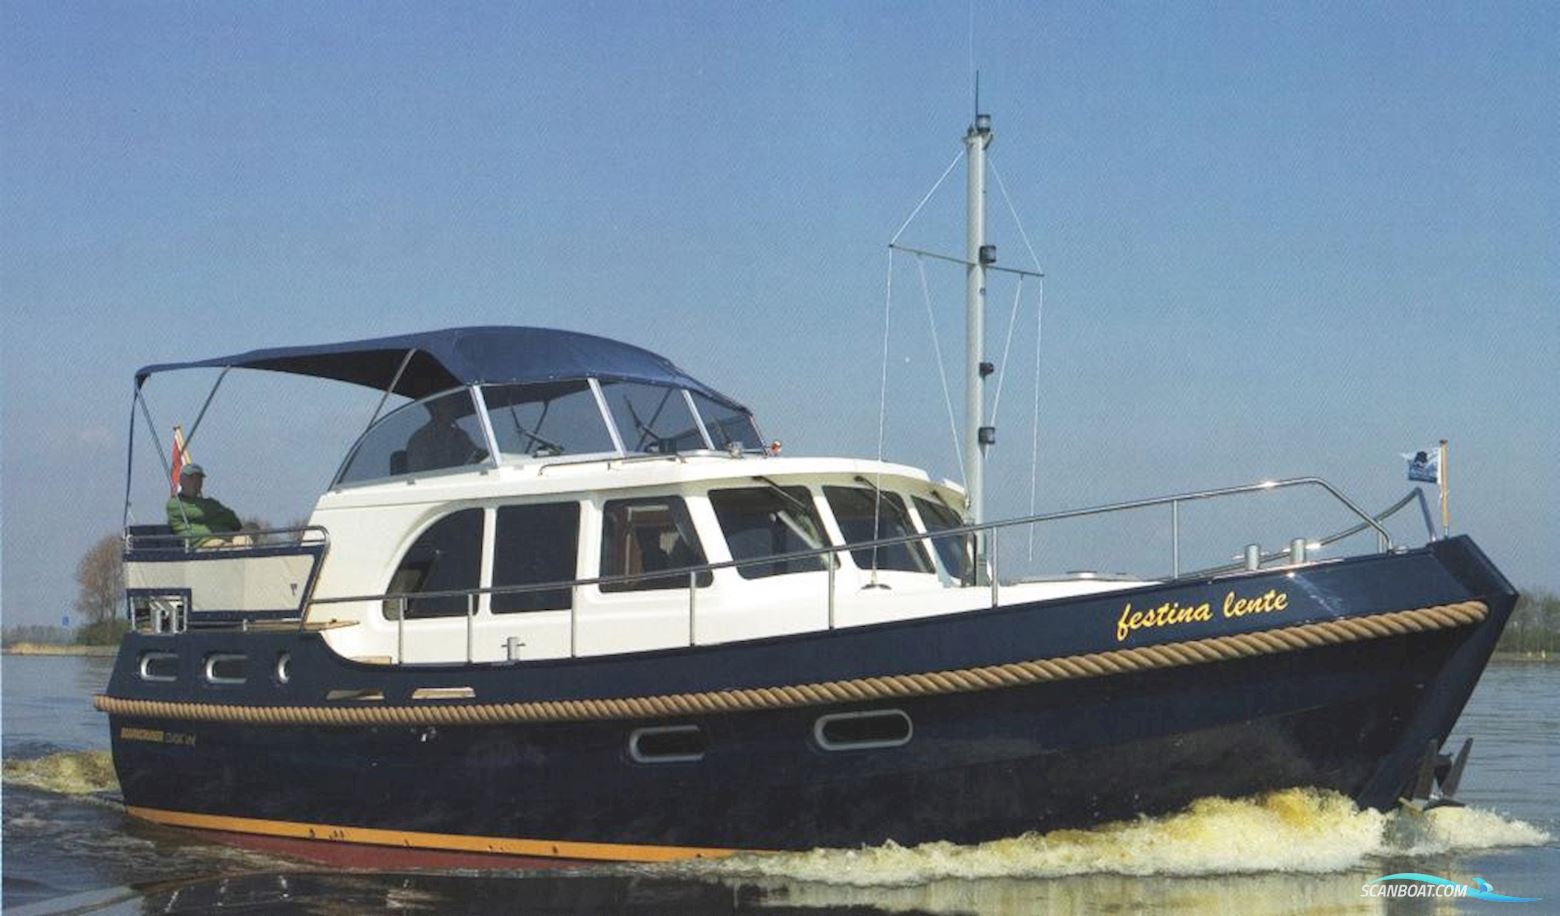 Boarncruiser 38 Classic Line AK Motor boat 2005, with Perkins Sabre engine, Germany